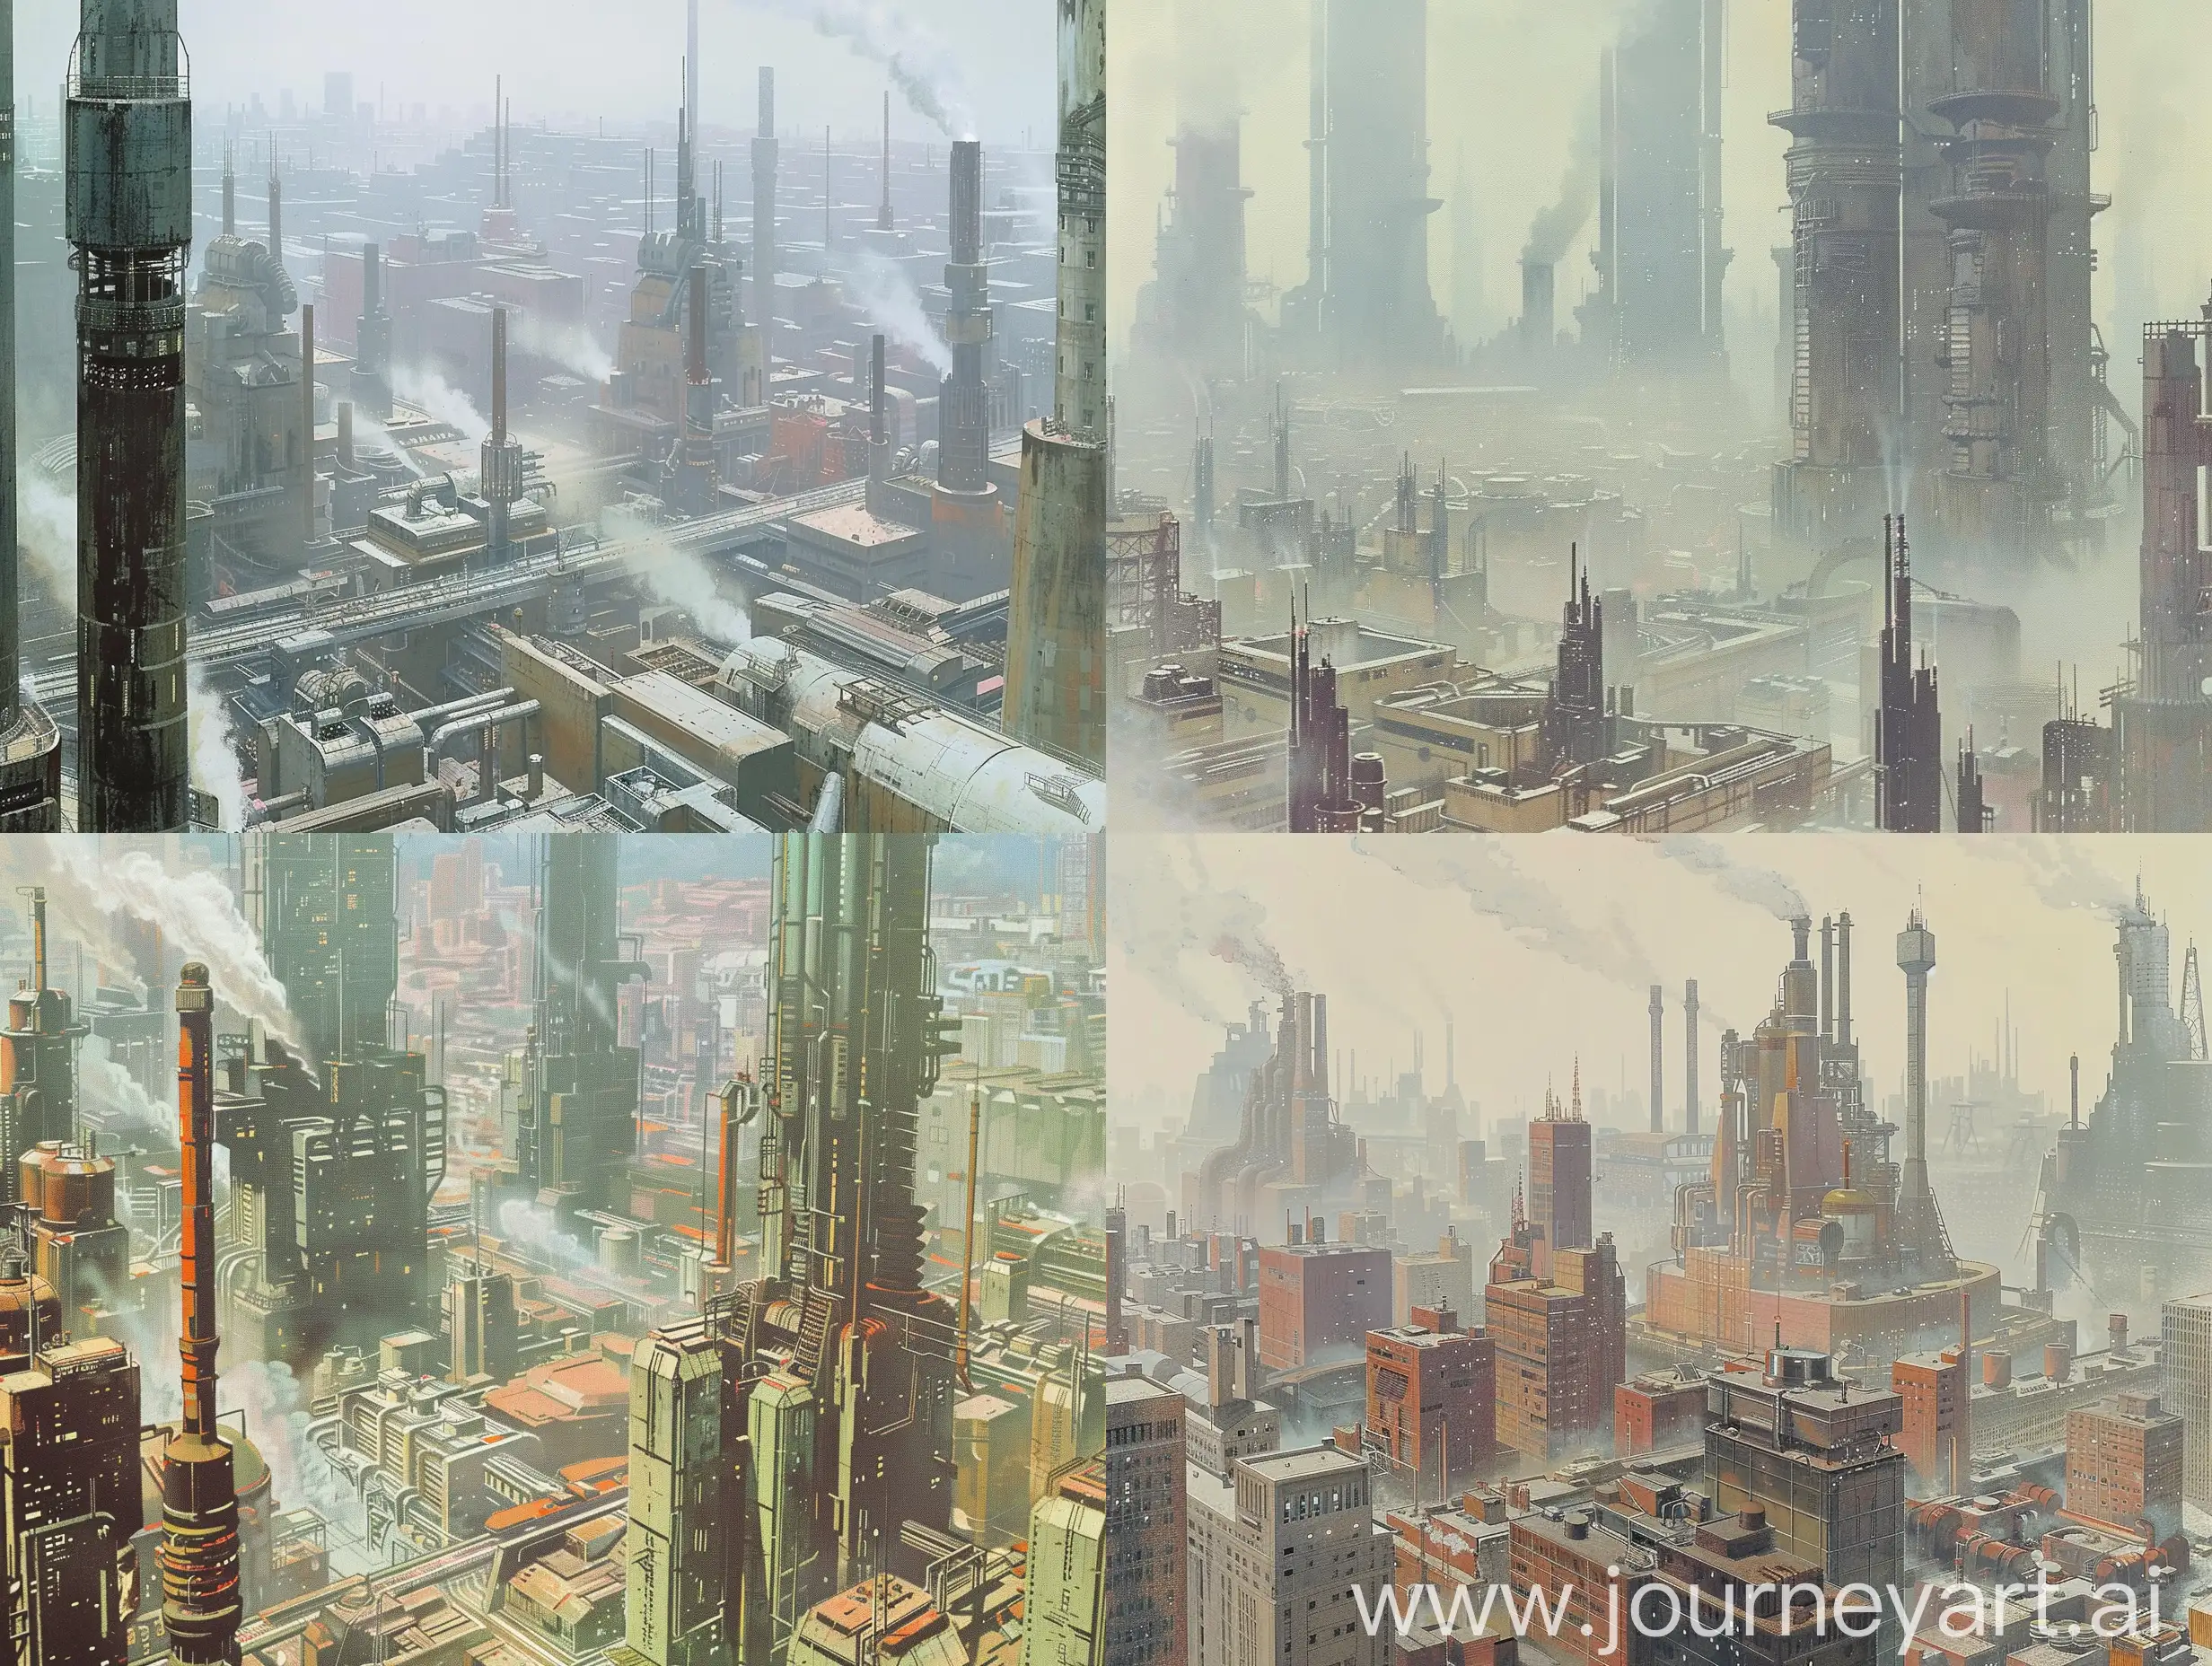 Futuristic-Hazy-Industrial-Cityscape-with-Tall-Buildings-and-Factories